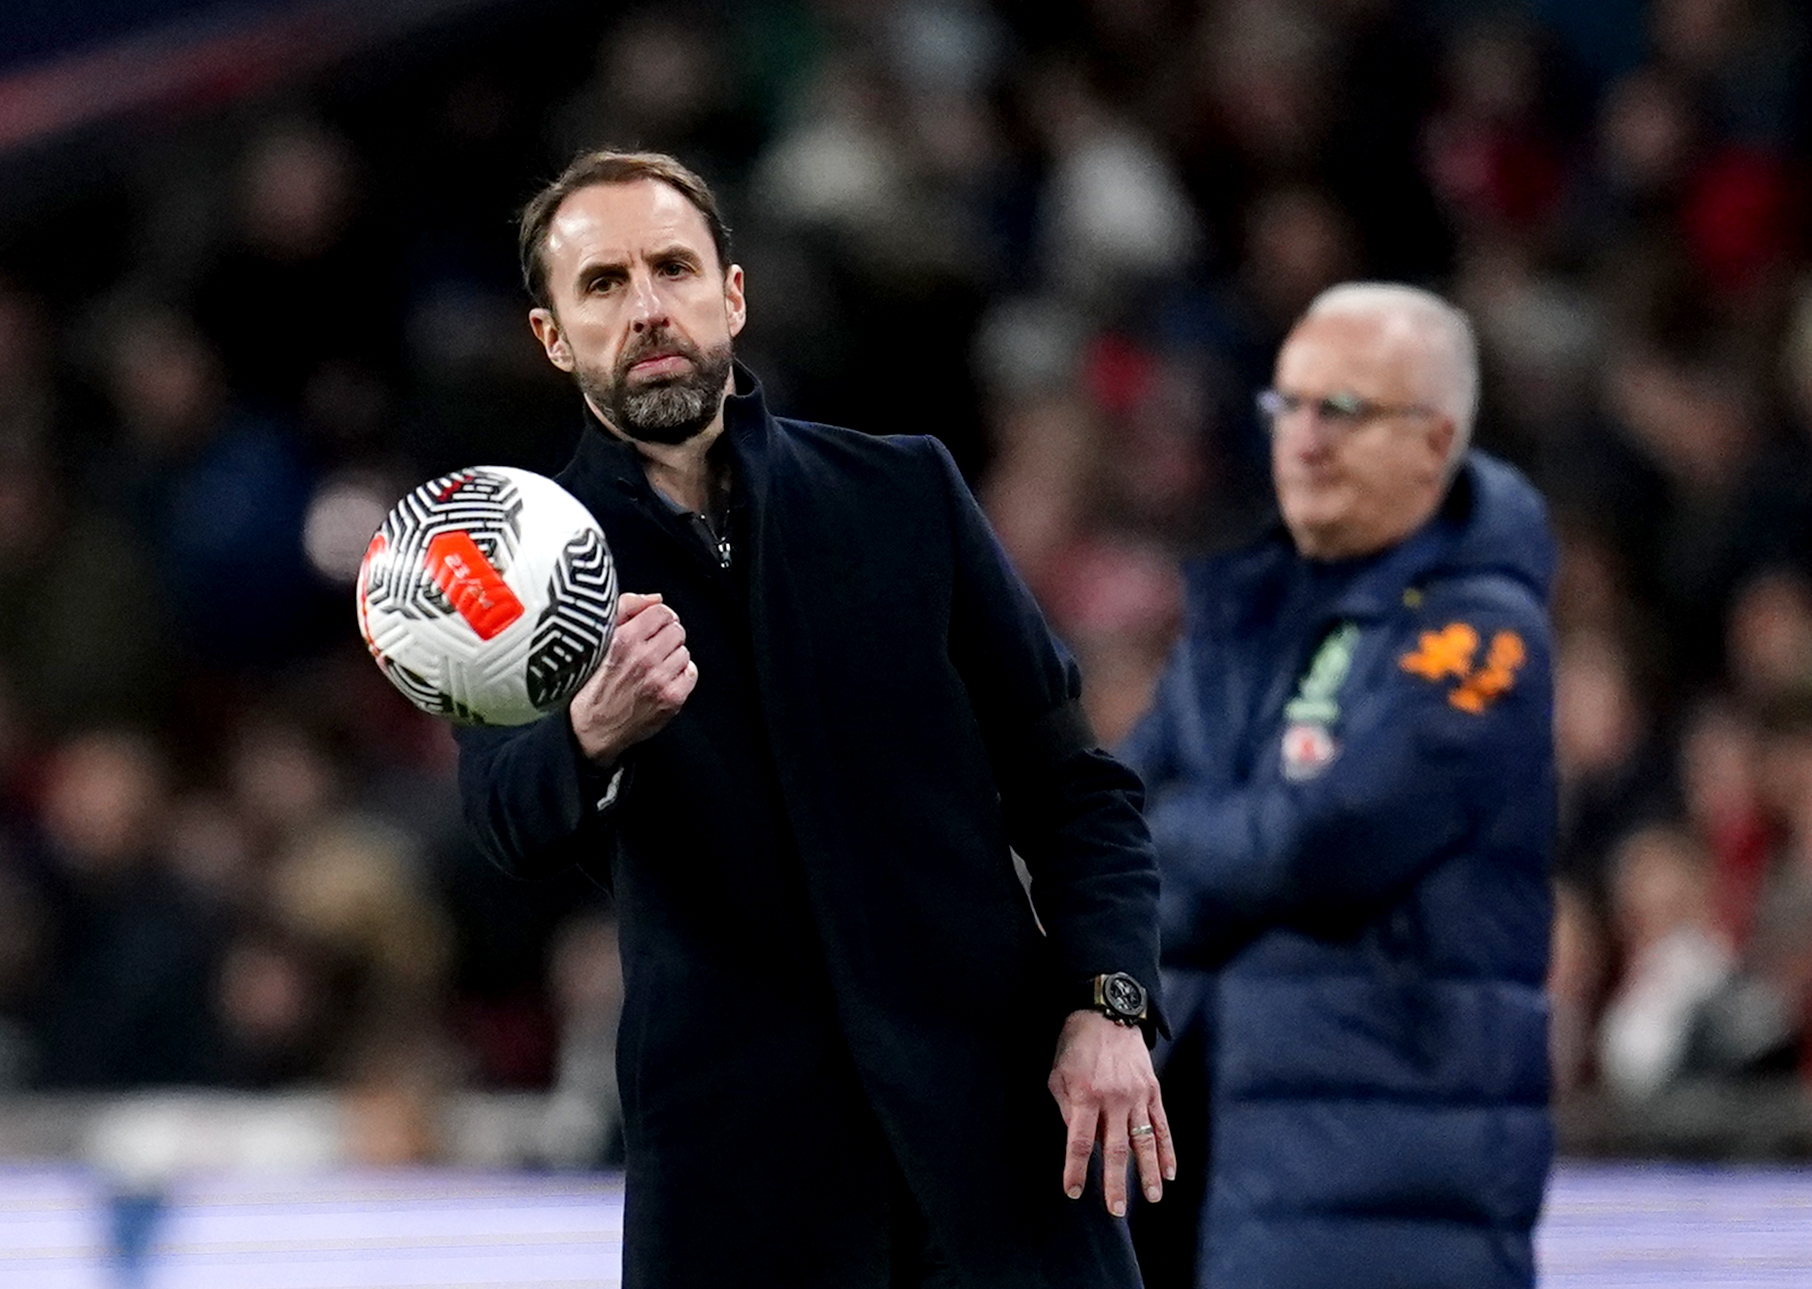 England manager Gareth Southgate has been linked with Manchester United in recent weeks